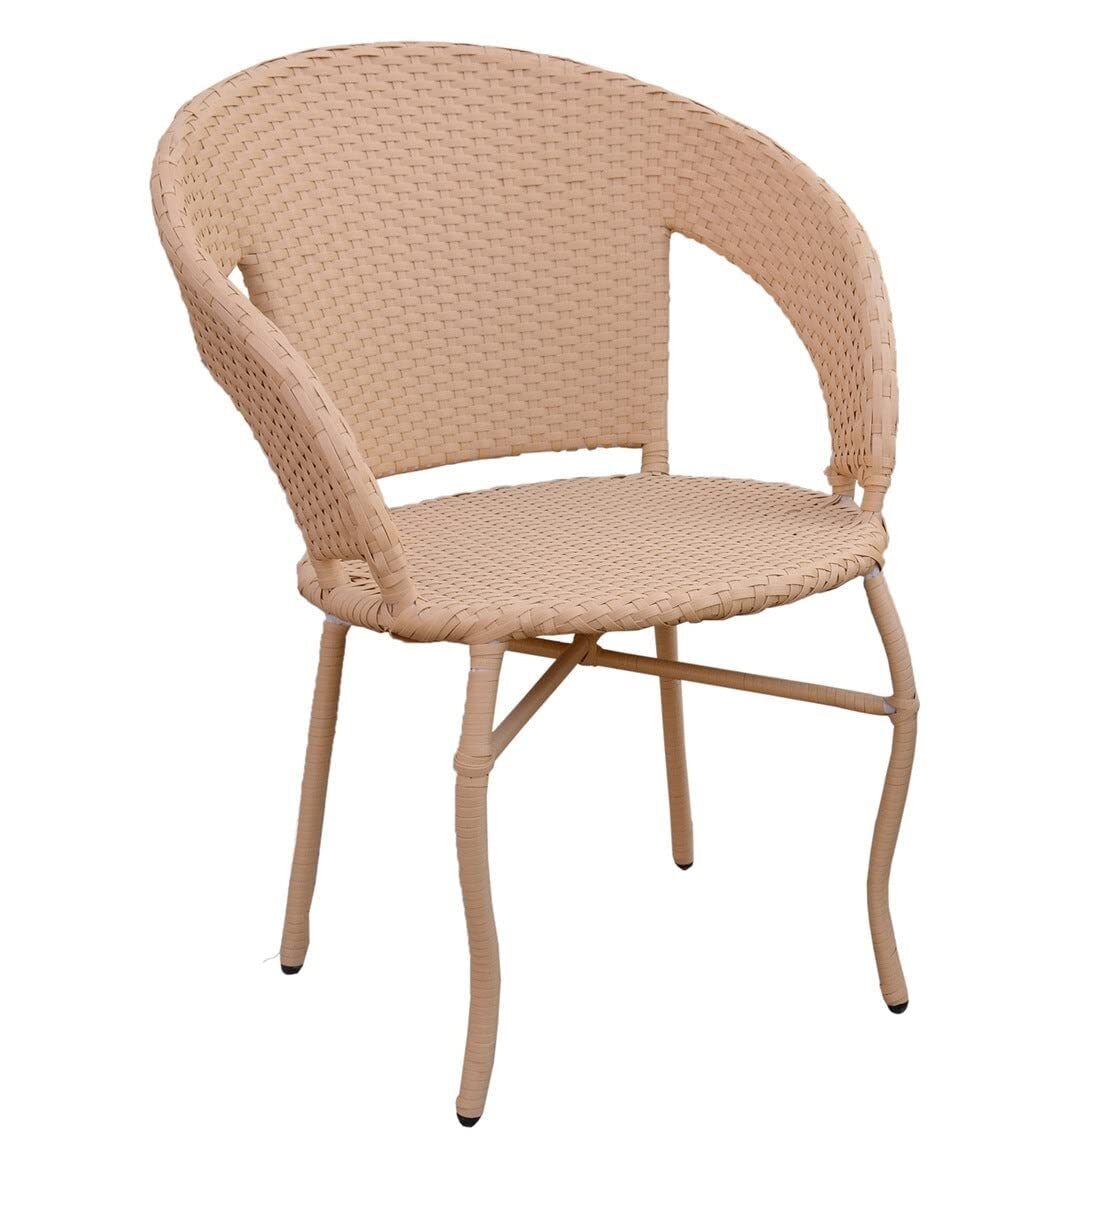 Patio Chair Sets